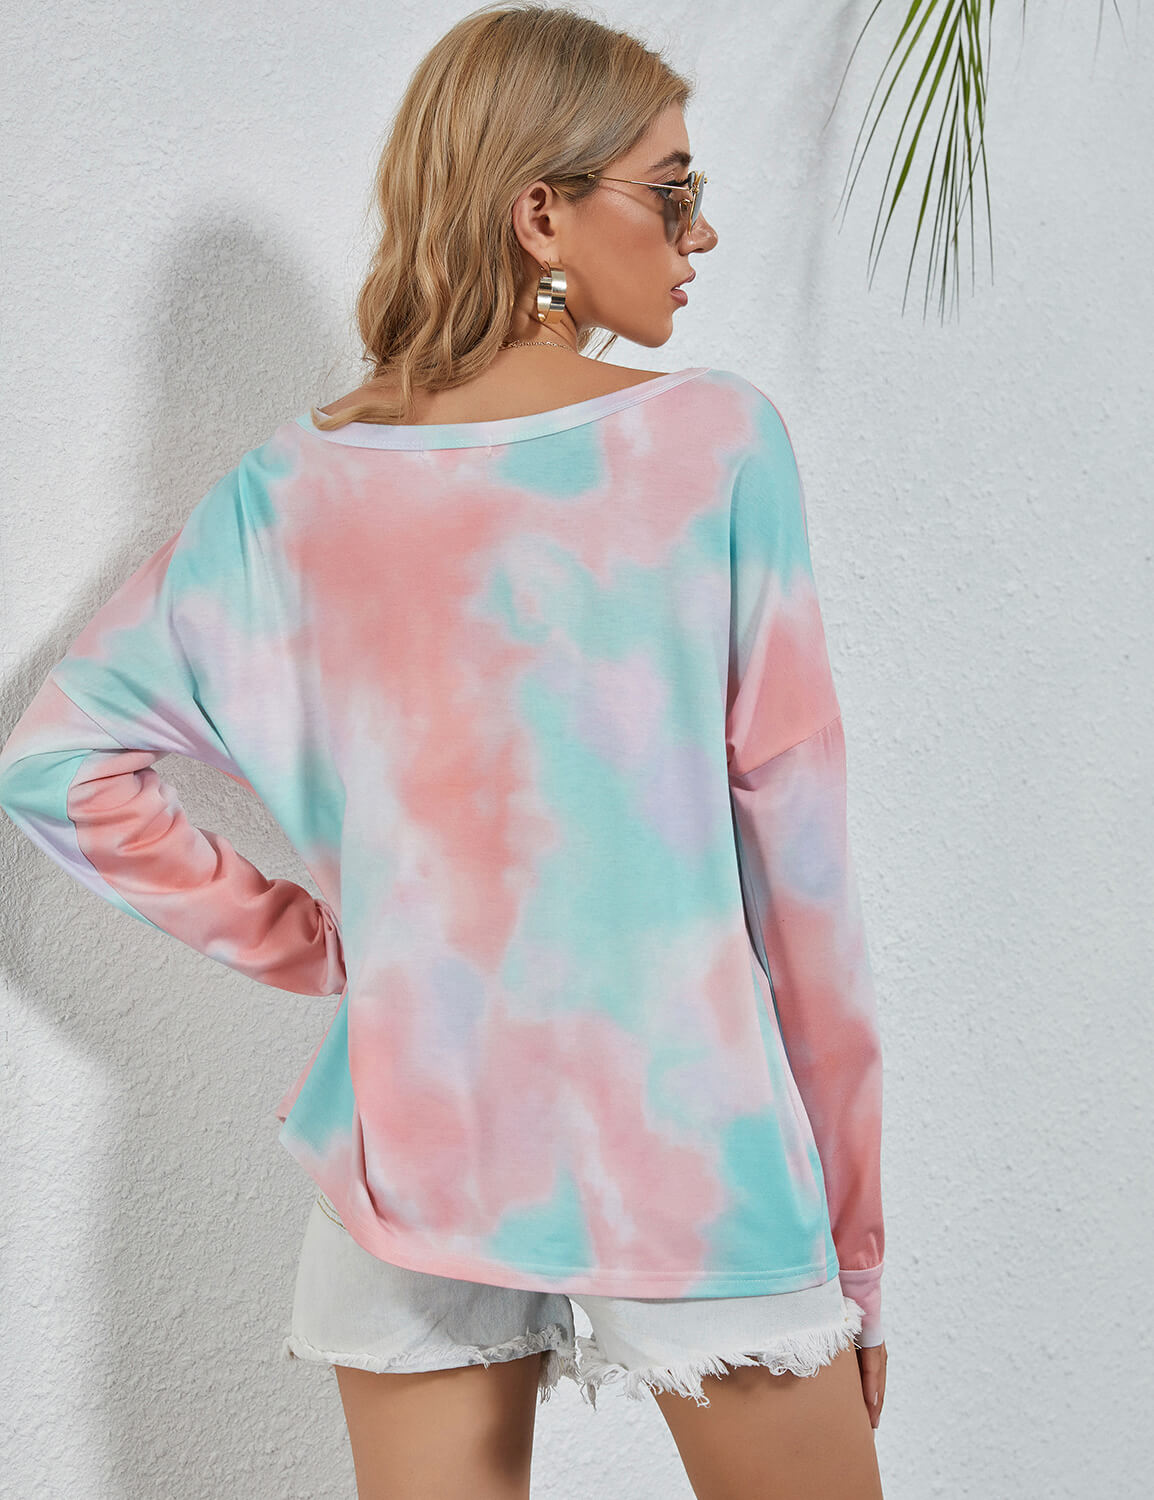 Blooming Jelly_Chic Girl Round Neck Tie Dye T-Shirt_Tie Dye Print_155288_14_Street Style Women Fashion Outfits_Tops_T-Shirt